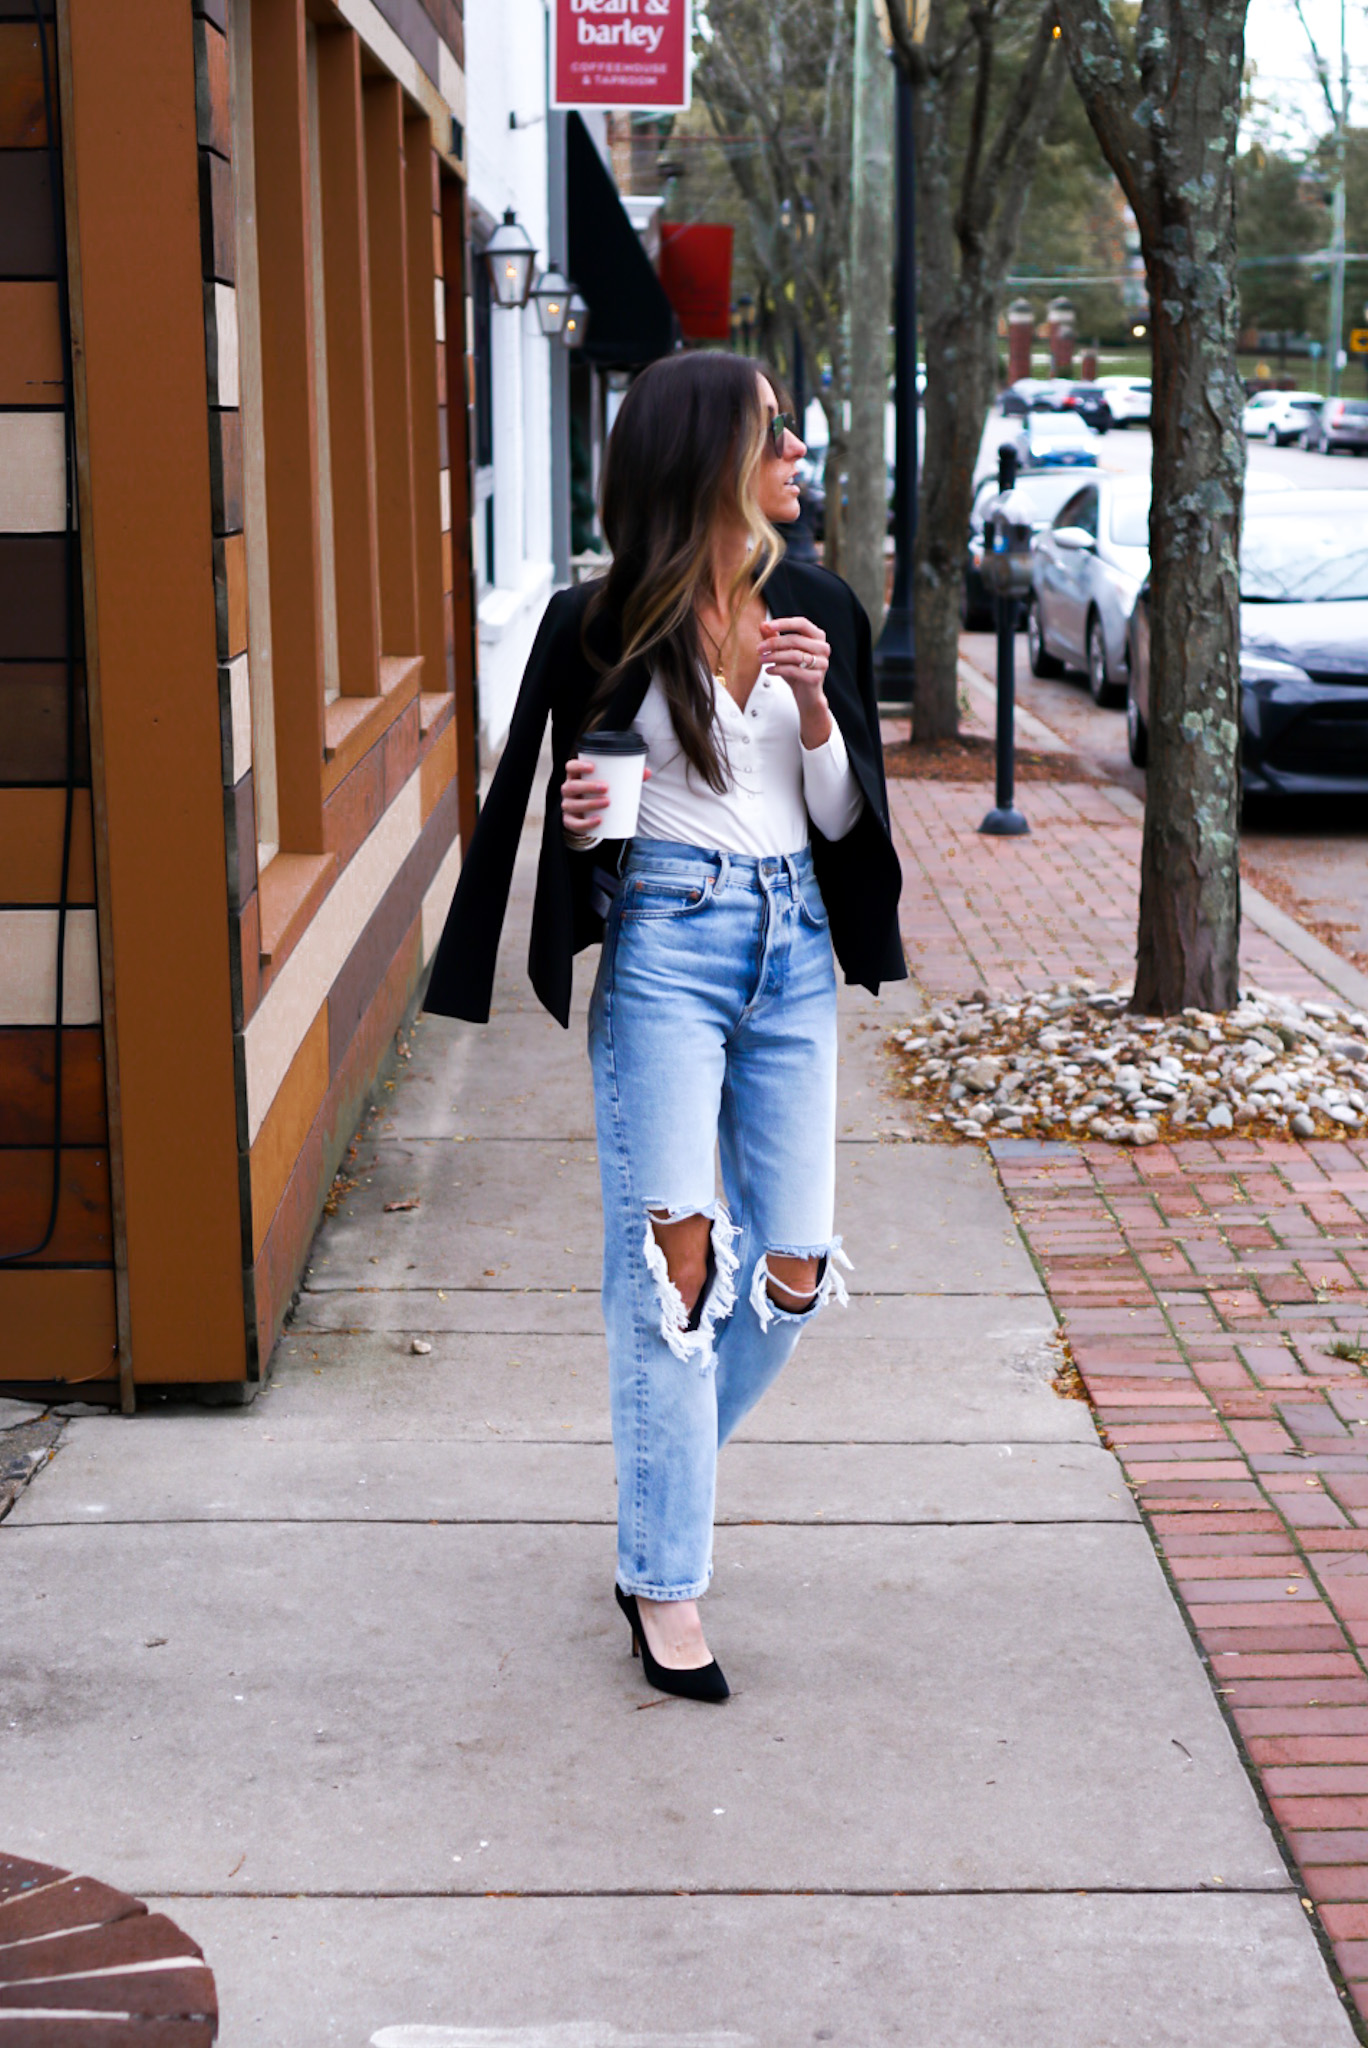 Styling Jeans + How to Find the Best Denim Jeans